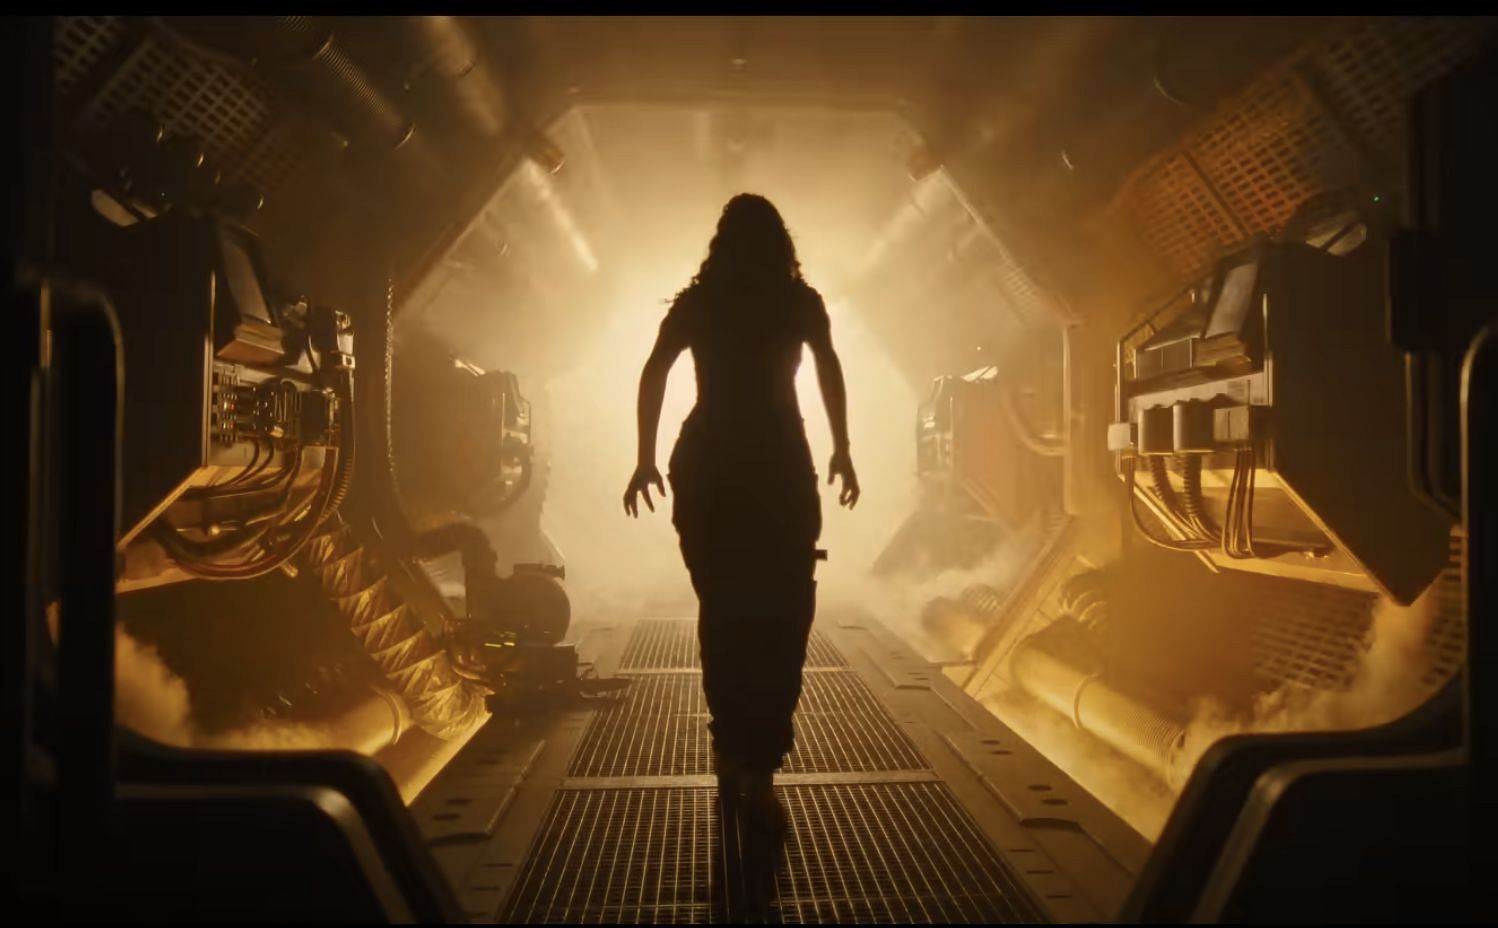 A still from the trailer of the movie. (Image via 20th Century Studios)